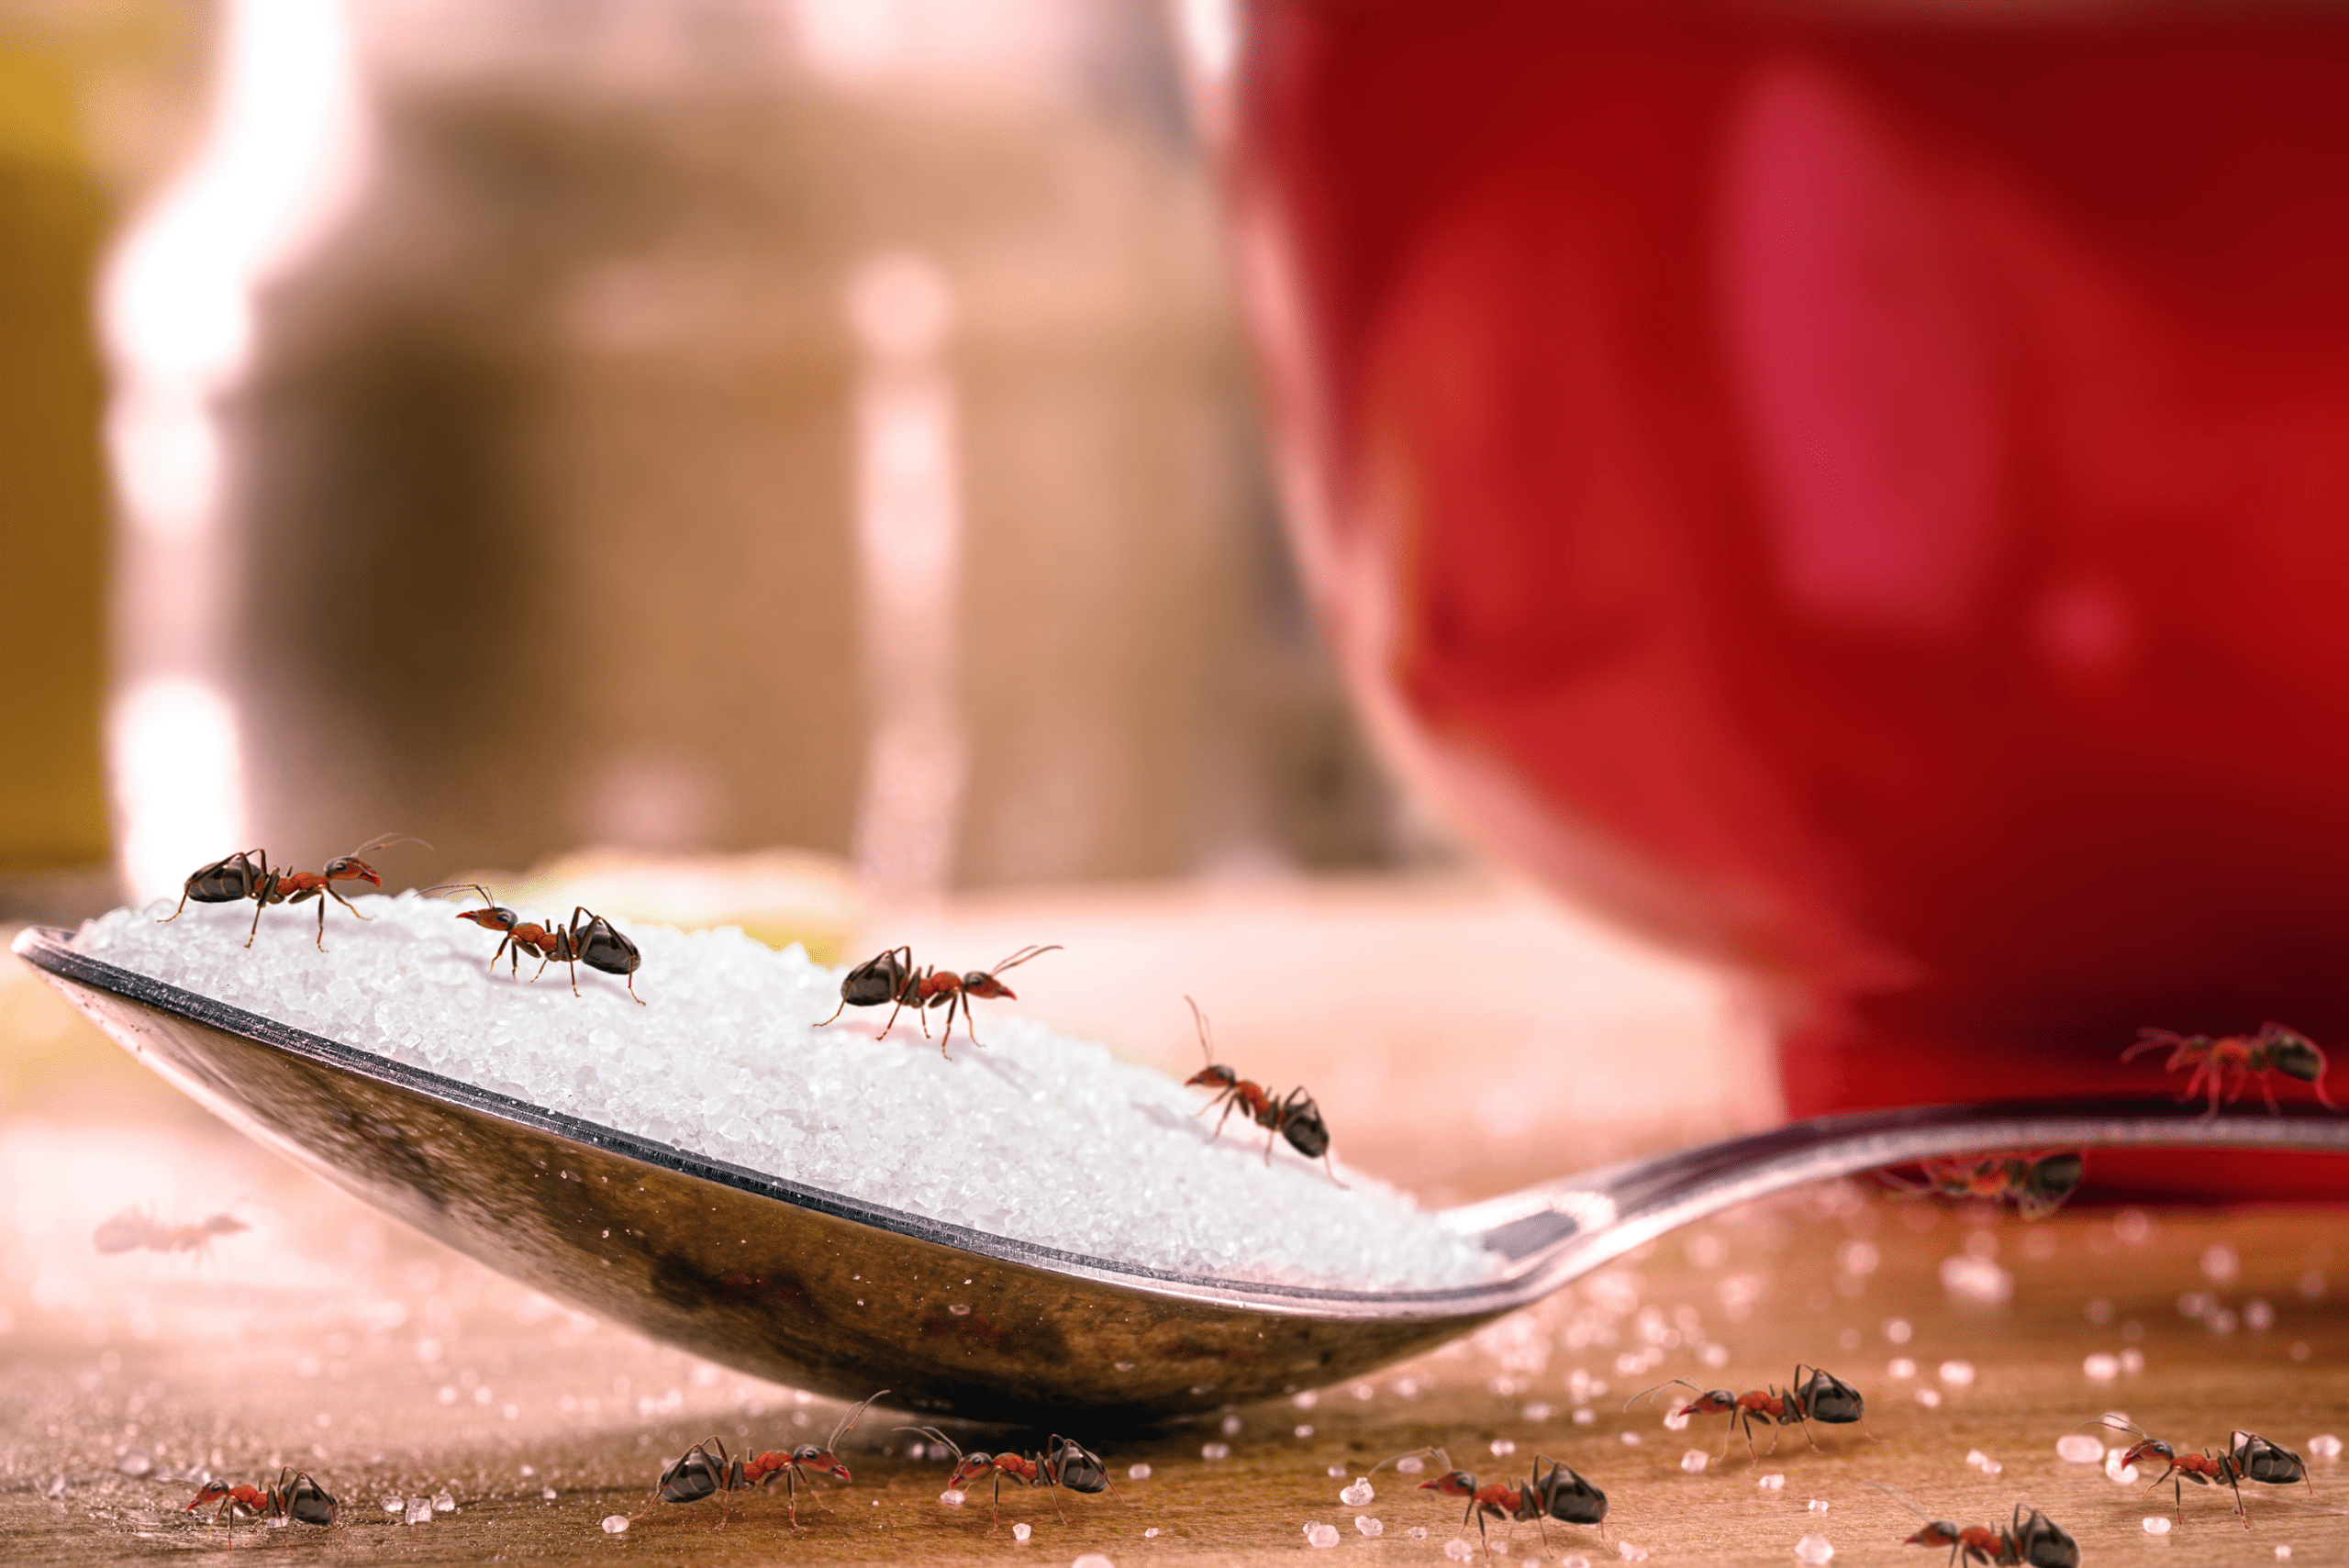 A spoon with sugar and ants on top.